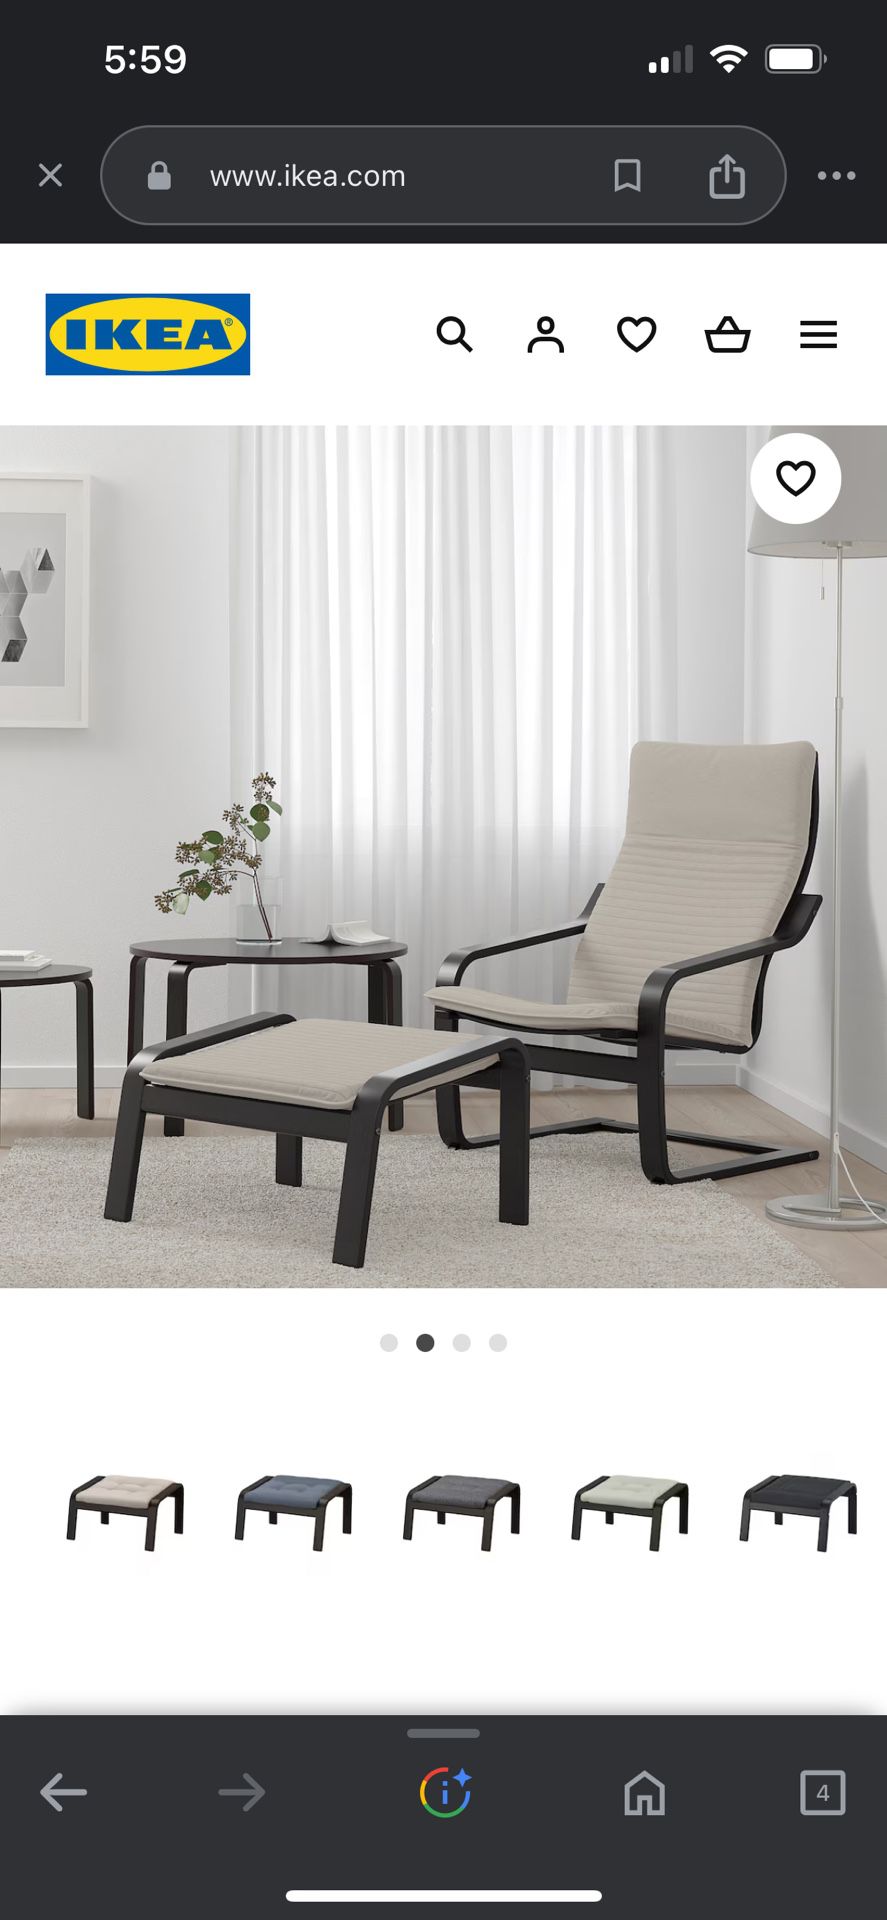 Ikea poang chair with ottoman